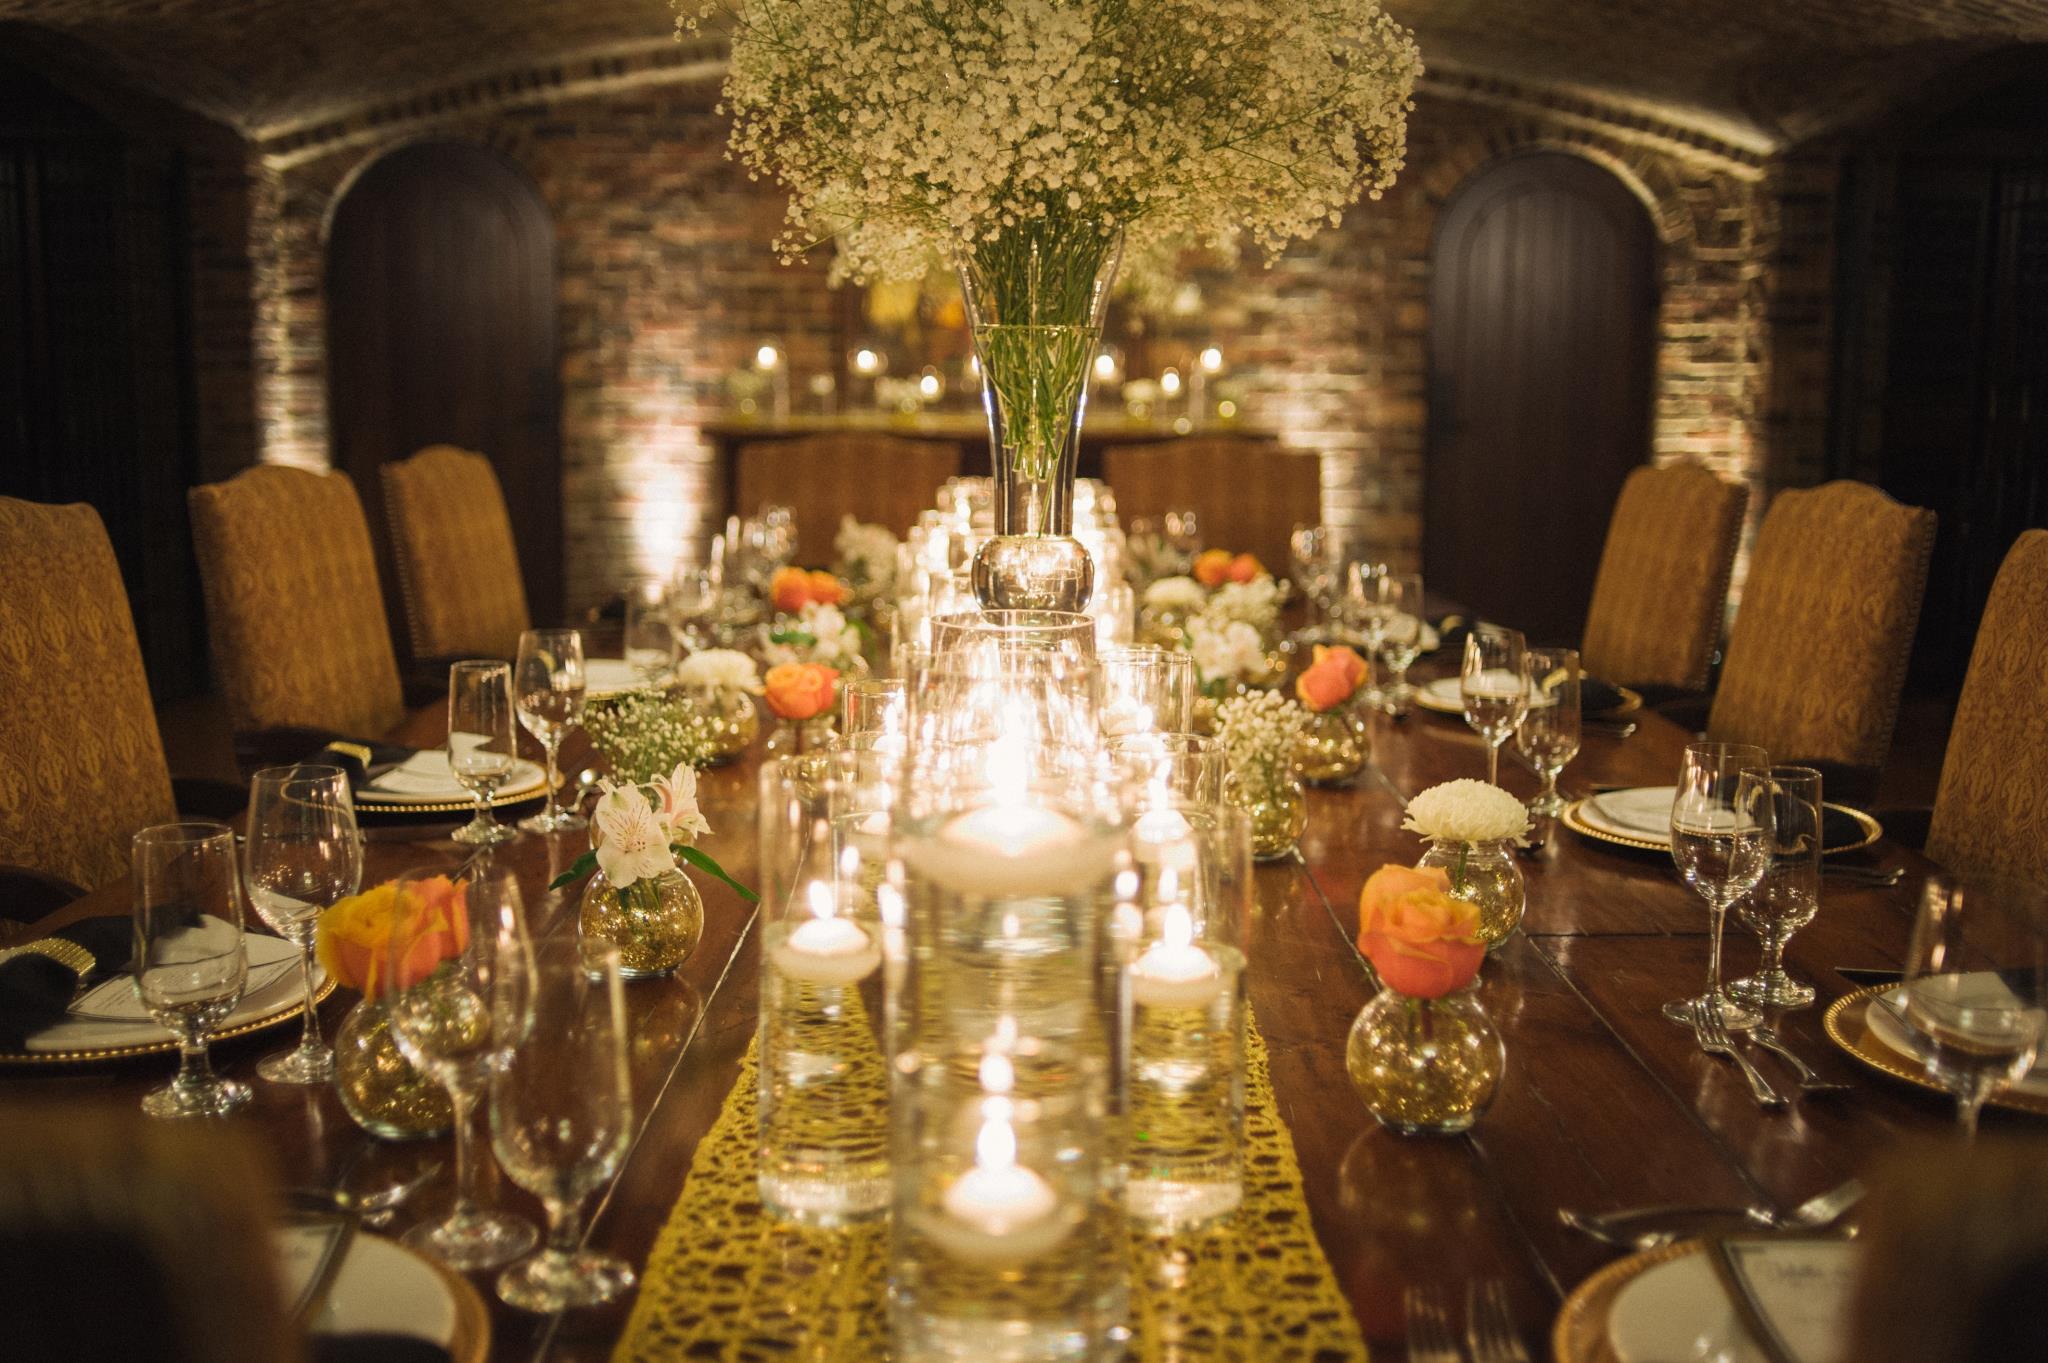 10 Steps to Plan a Rehearsal Dinner